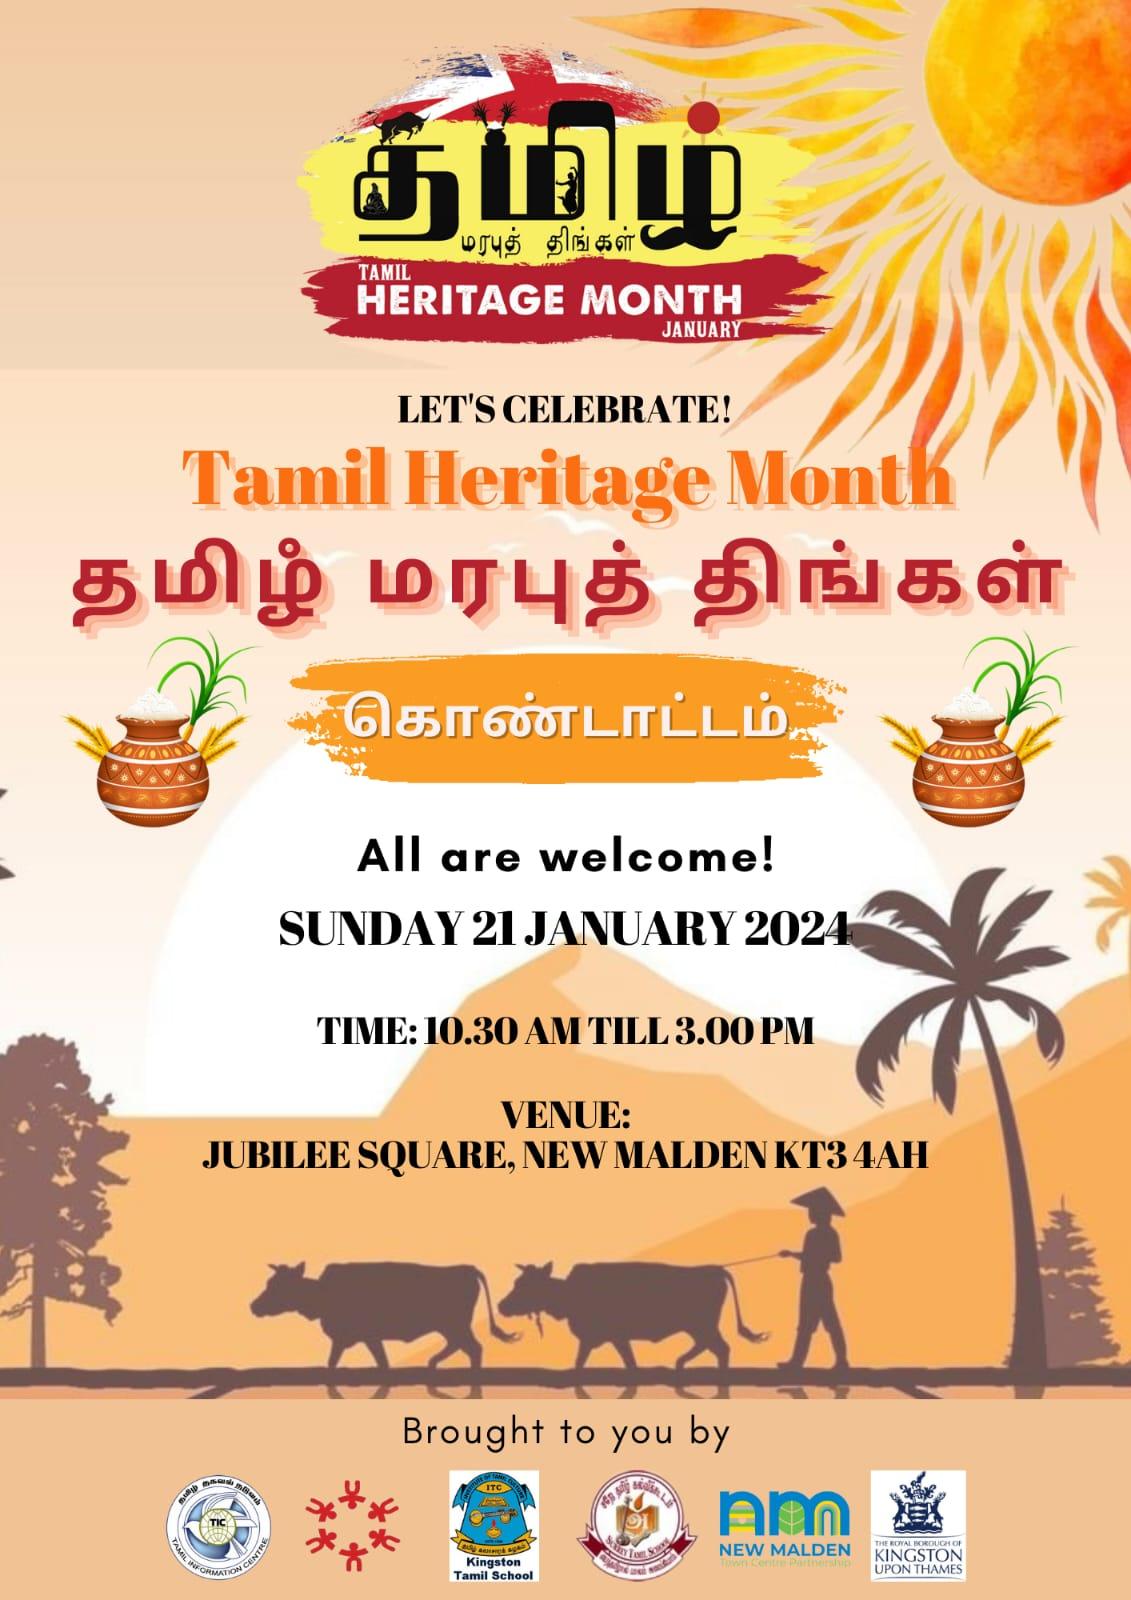 Tamil Heritage Month, Sunday 21 January, Jubilee Square.